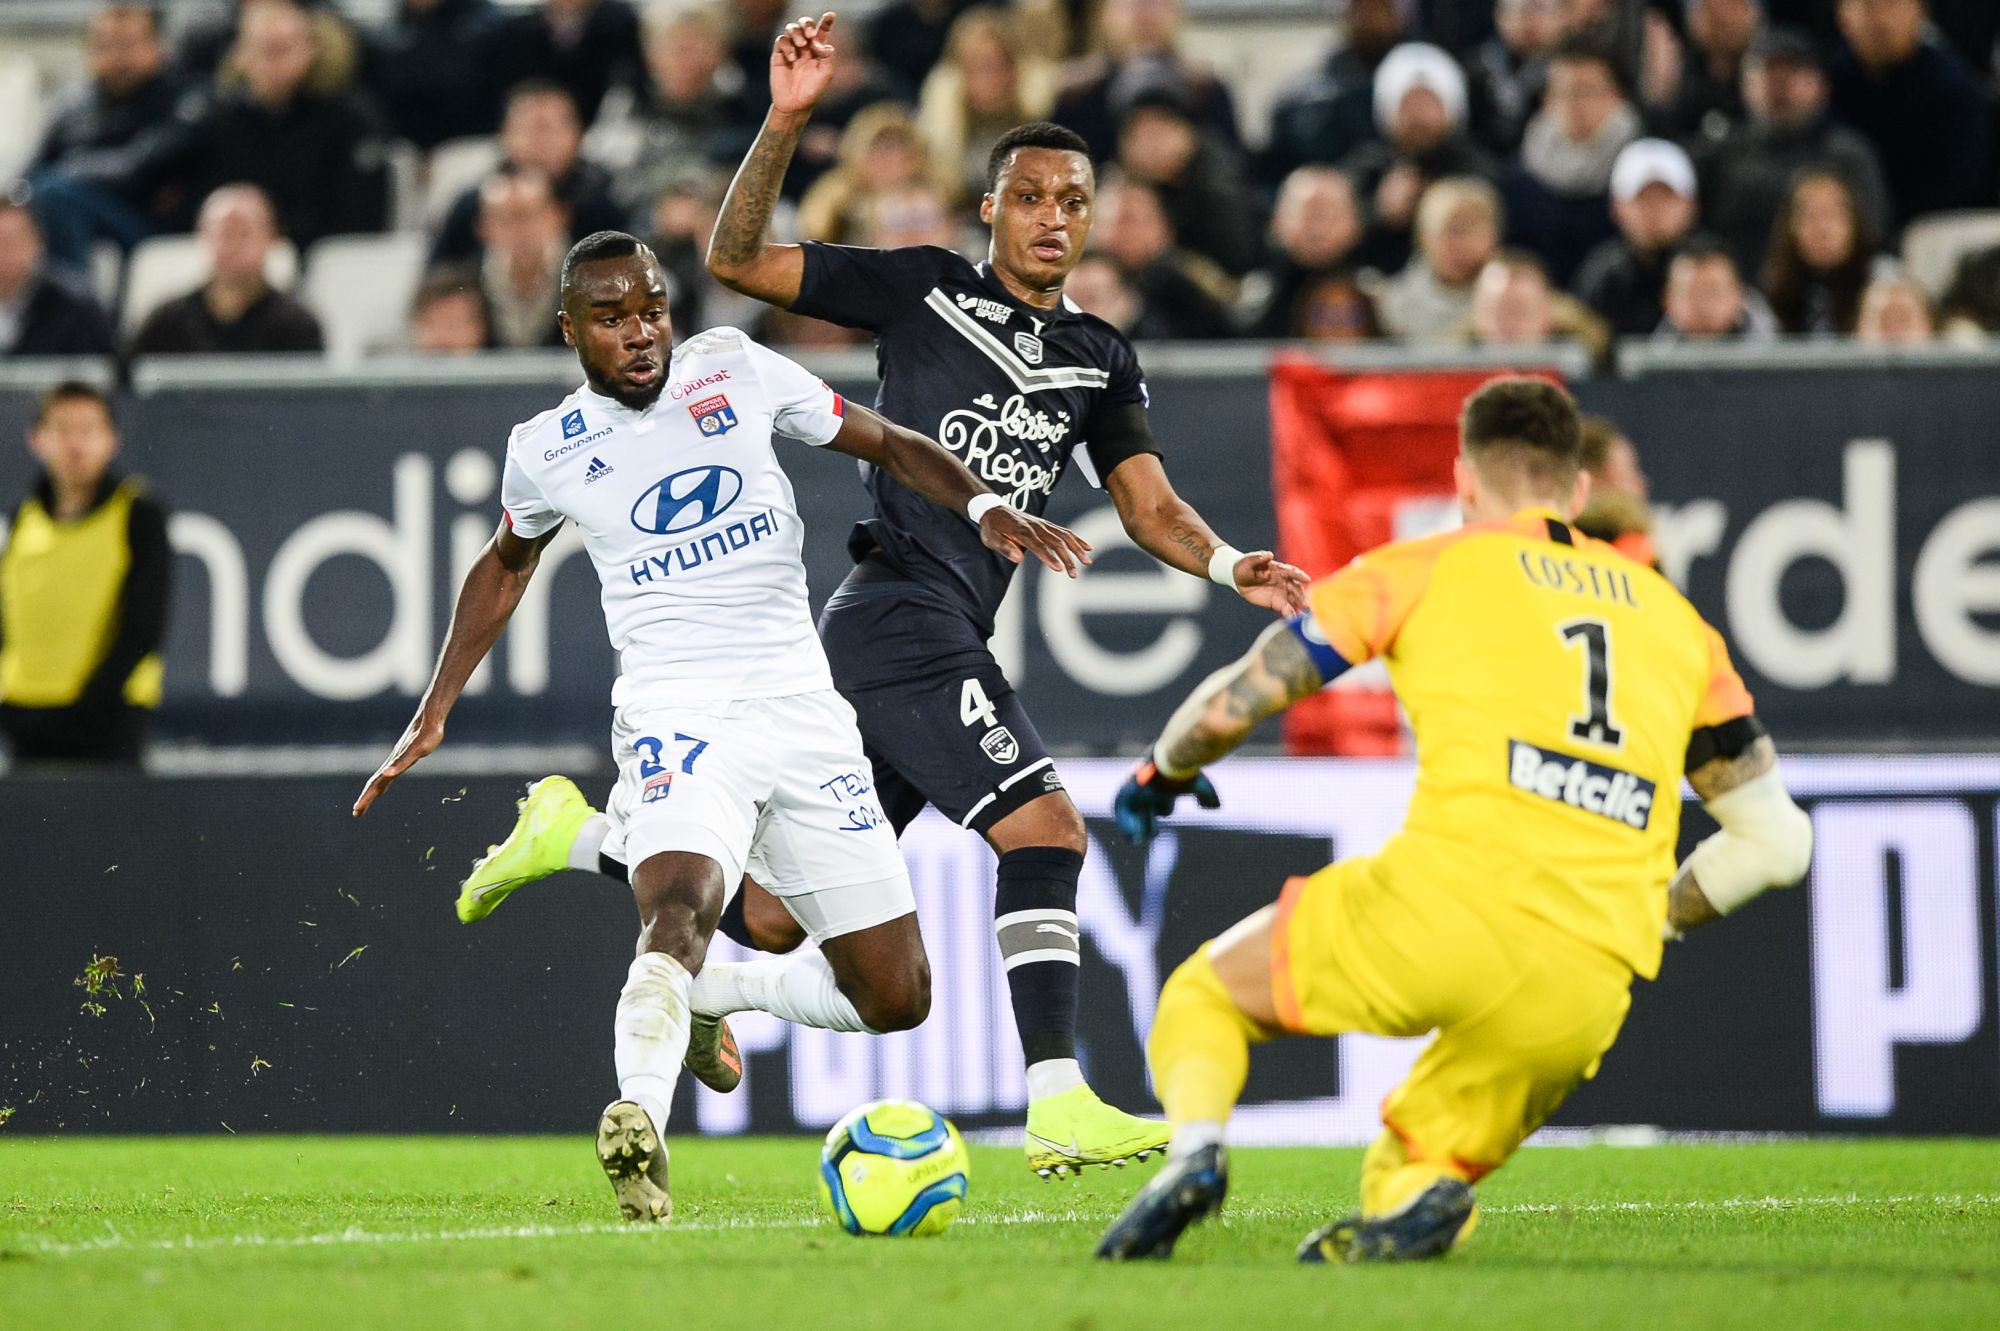 Edson MEXER of Bordeaux and Maxwel CORNET of Lyon during the Ligue 1 match between Girondins Bordeaux and Olympique Lyon at Stade Matmut Atlantique on January 11, 2020 in Bordeaux, France. (Photo by Baptiste Fernandez/Icon Sport) - Matmut ATLANTIQUE - Bordeaux (France)